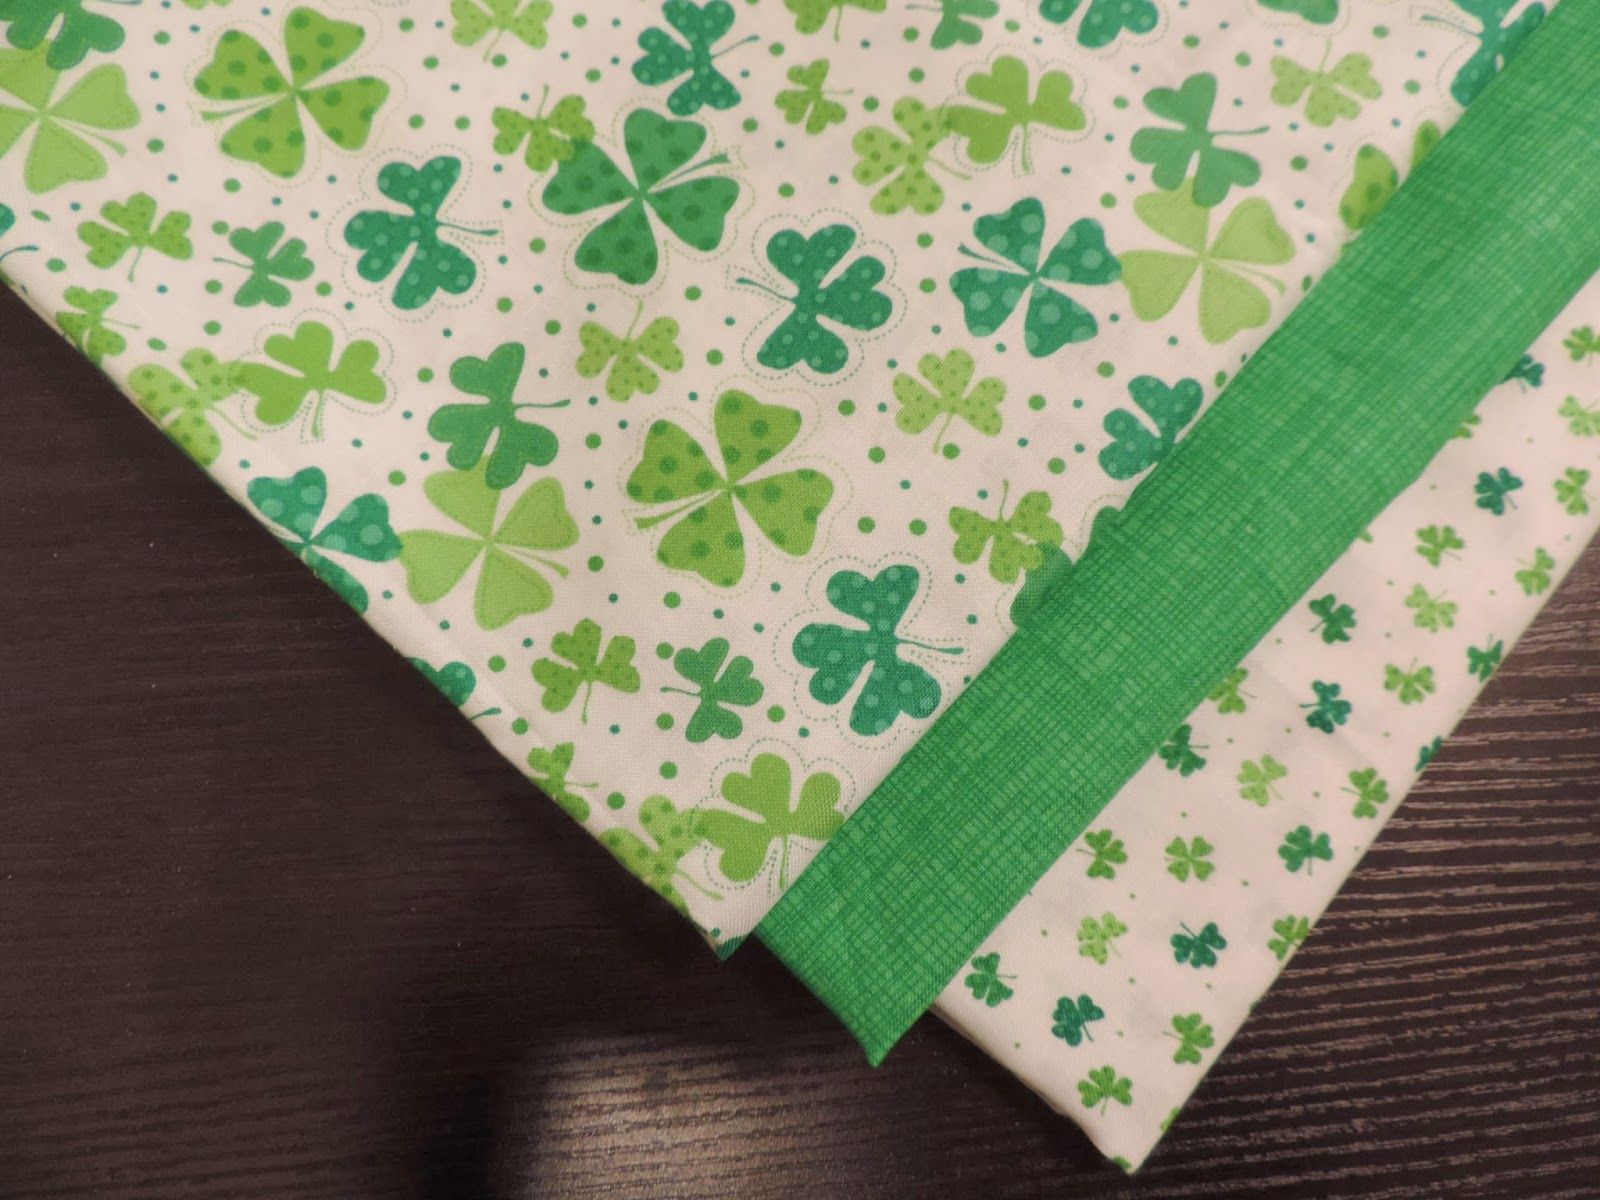 Timeless Treasures. Celebrating St. Patrick's Day with Sew Much Good